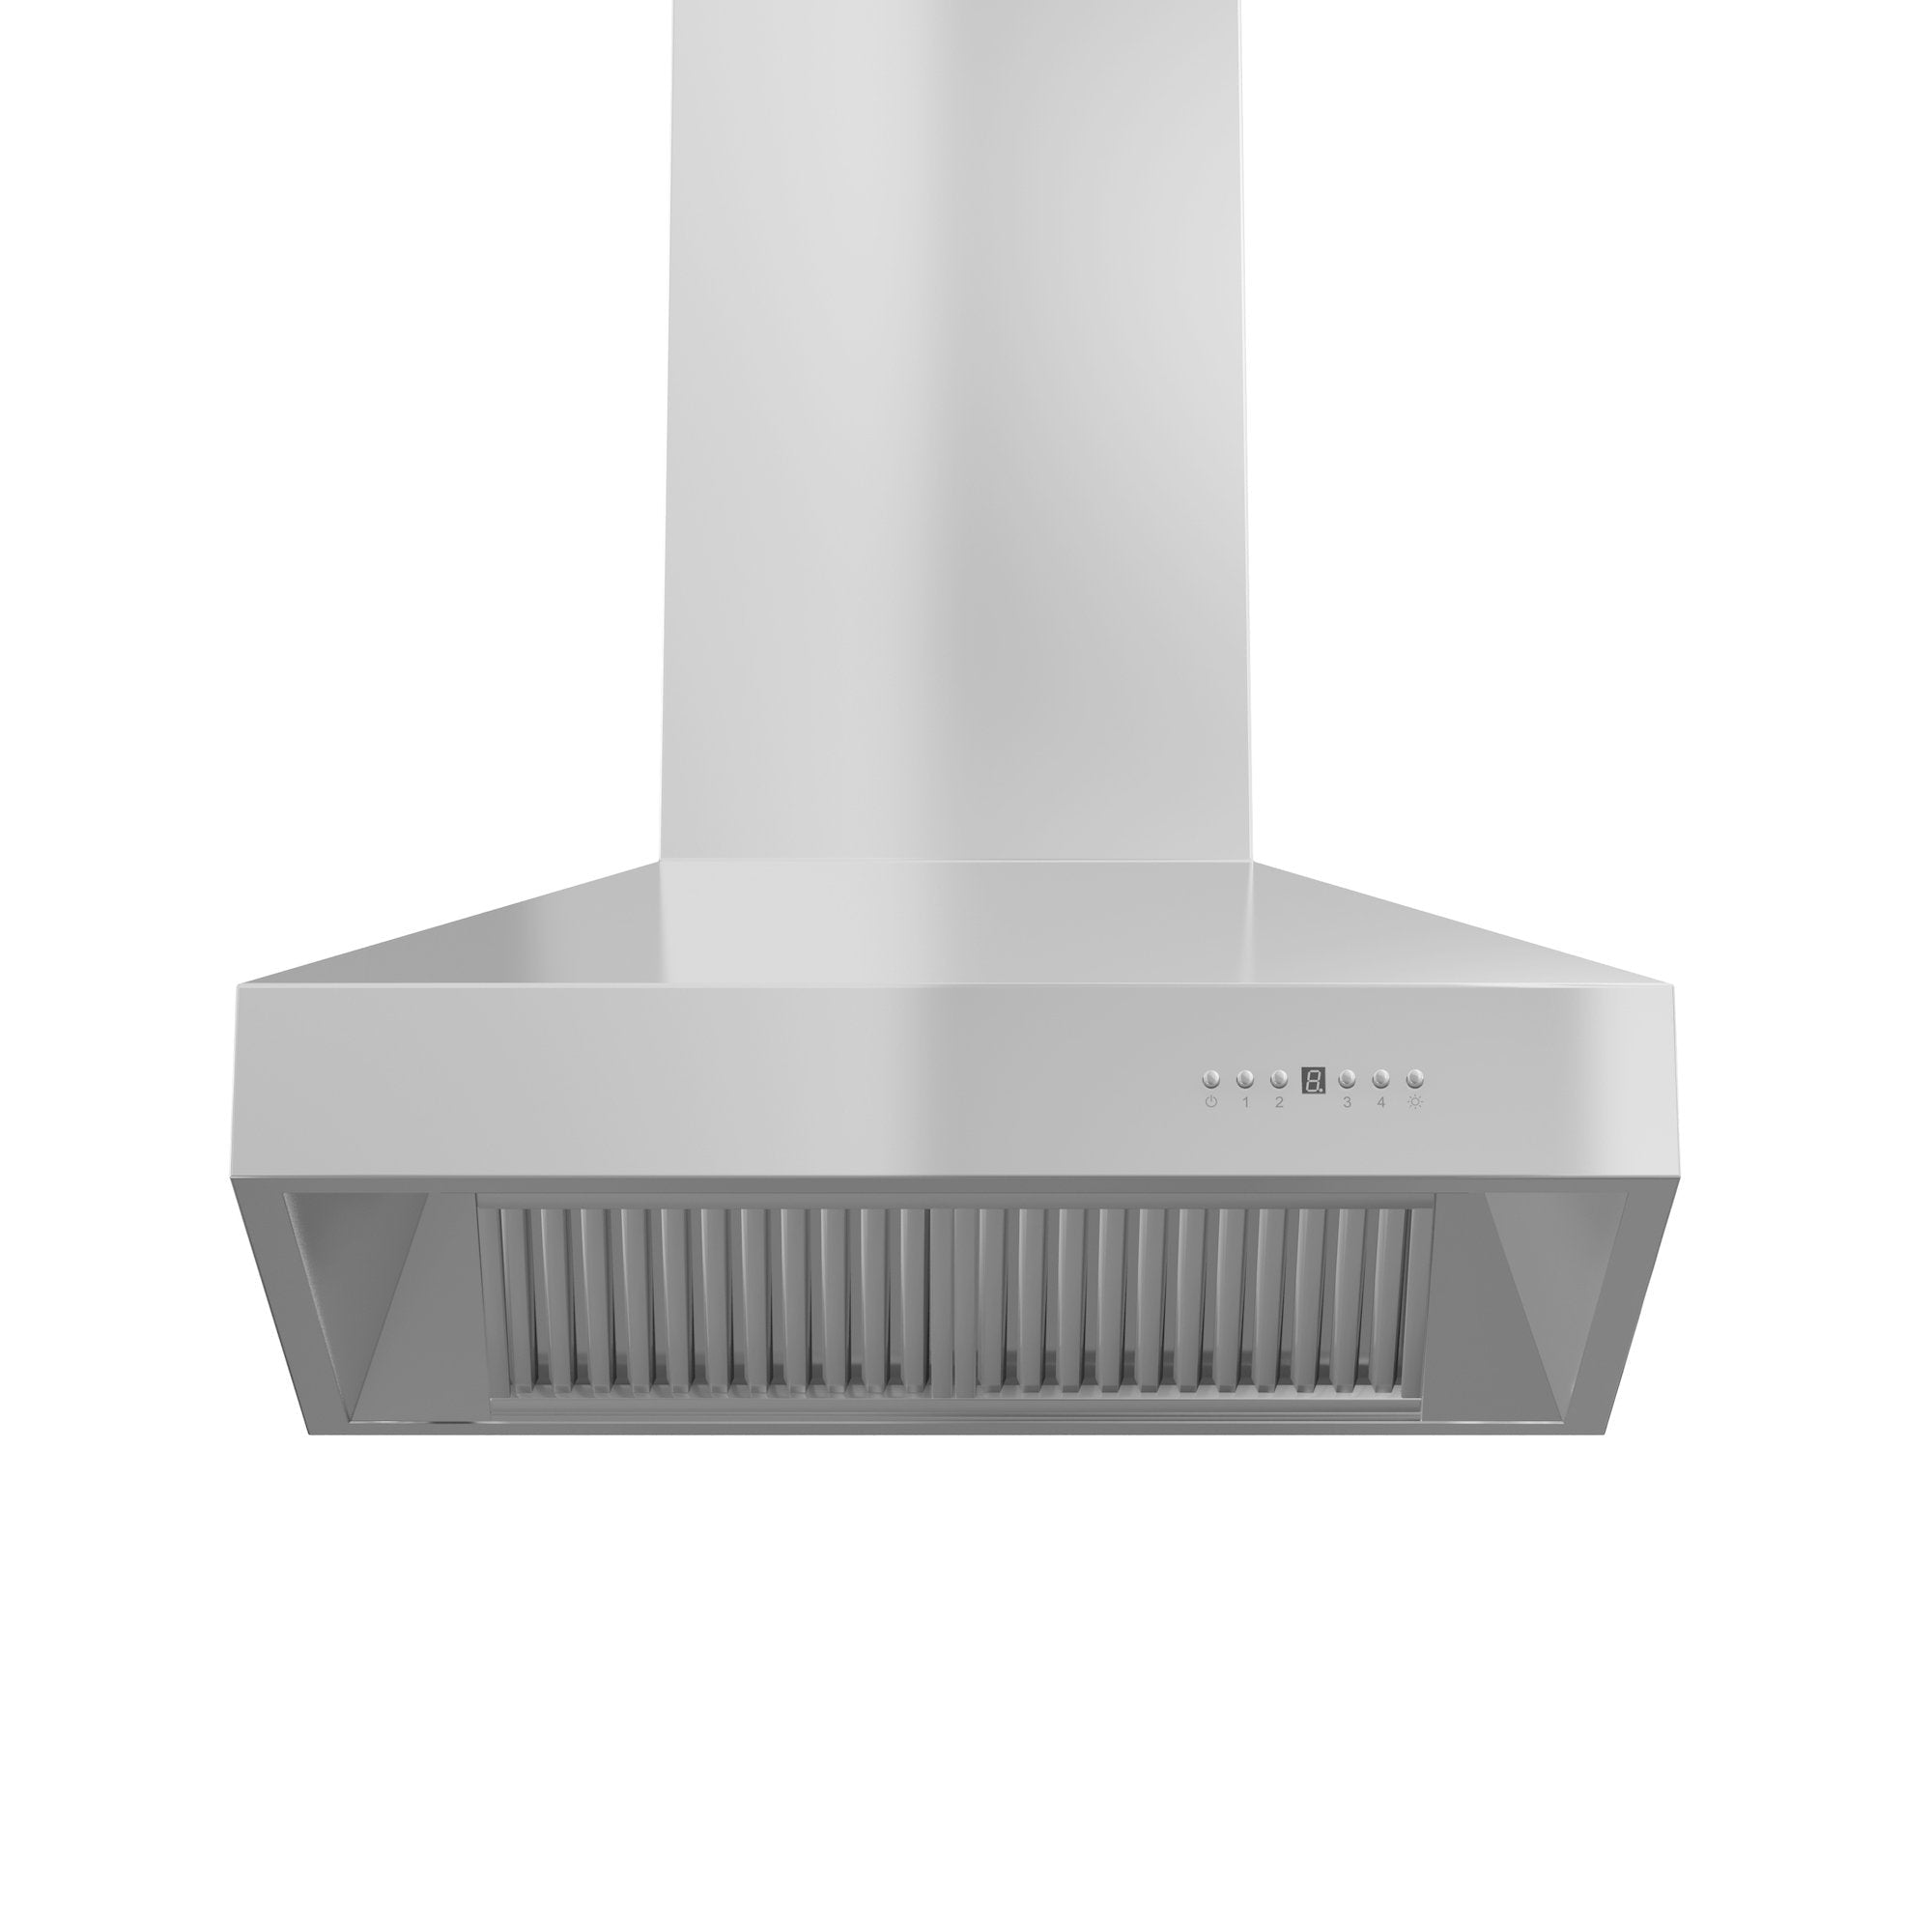 ZLINE Ducted Wall Mount Range Hood in Outdoor Approved Stainless Steel (697-304) front, under.